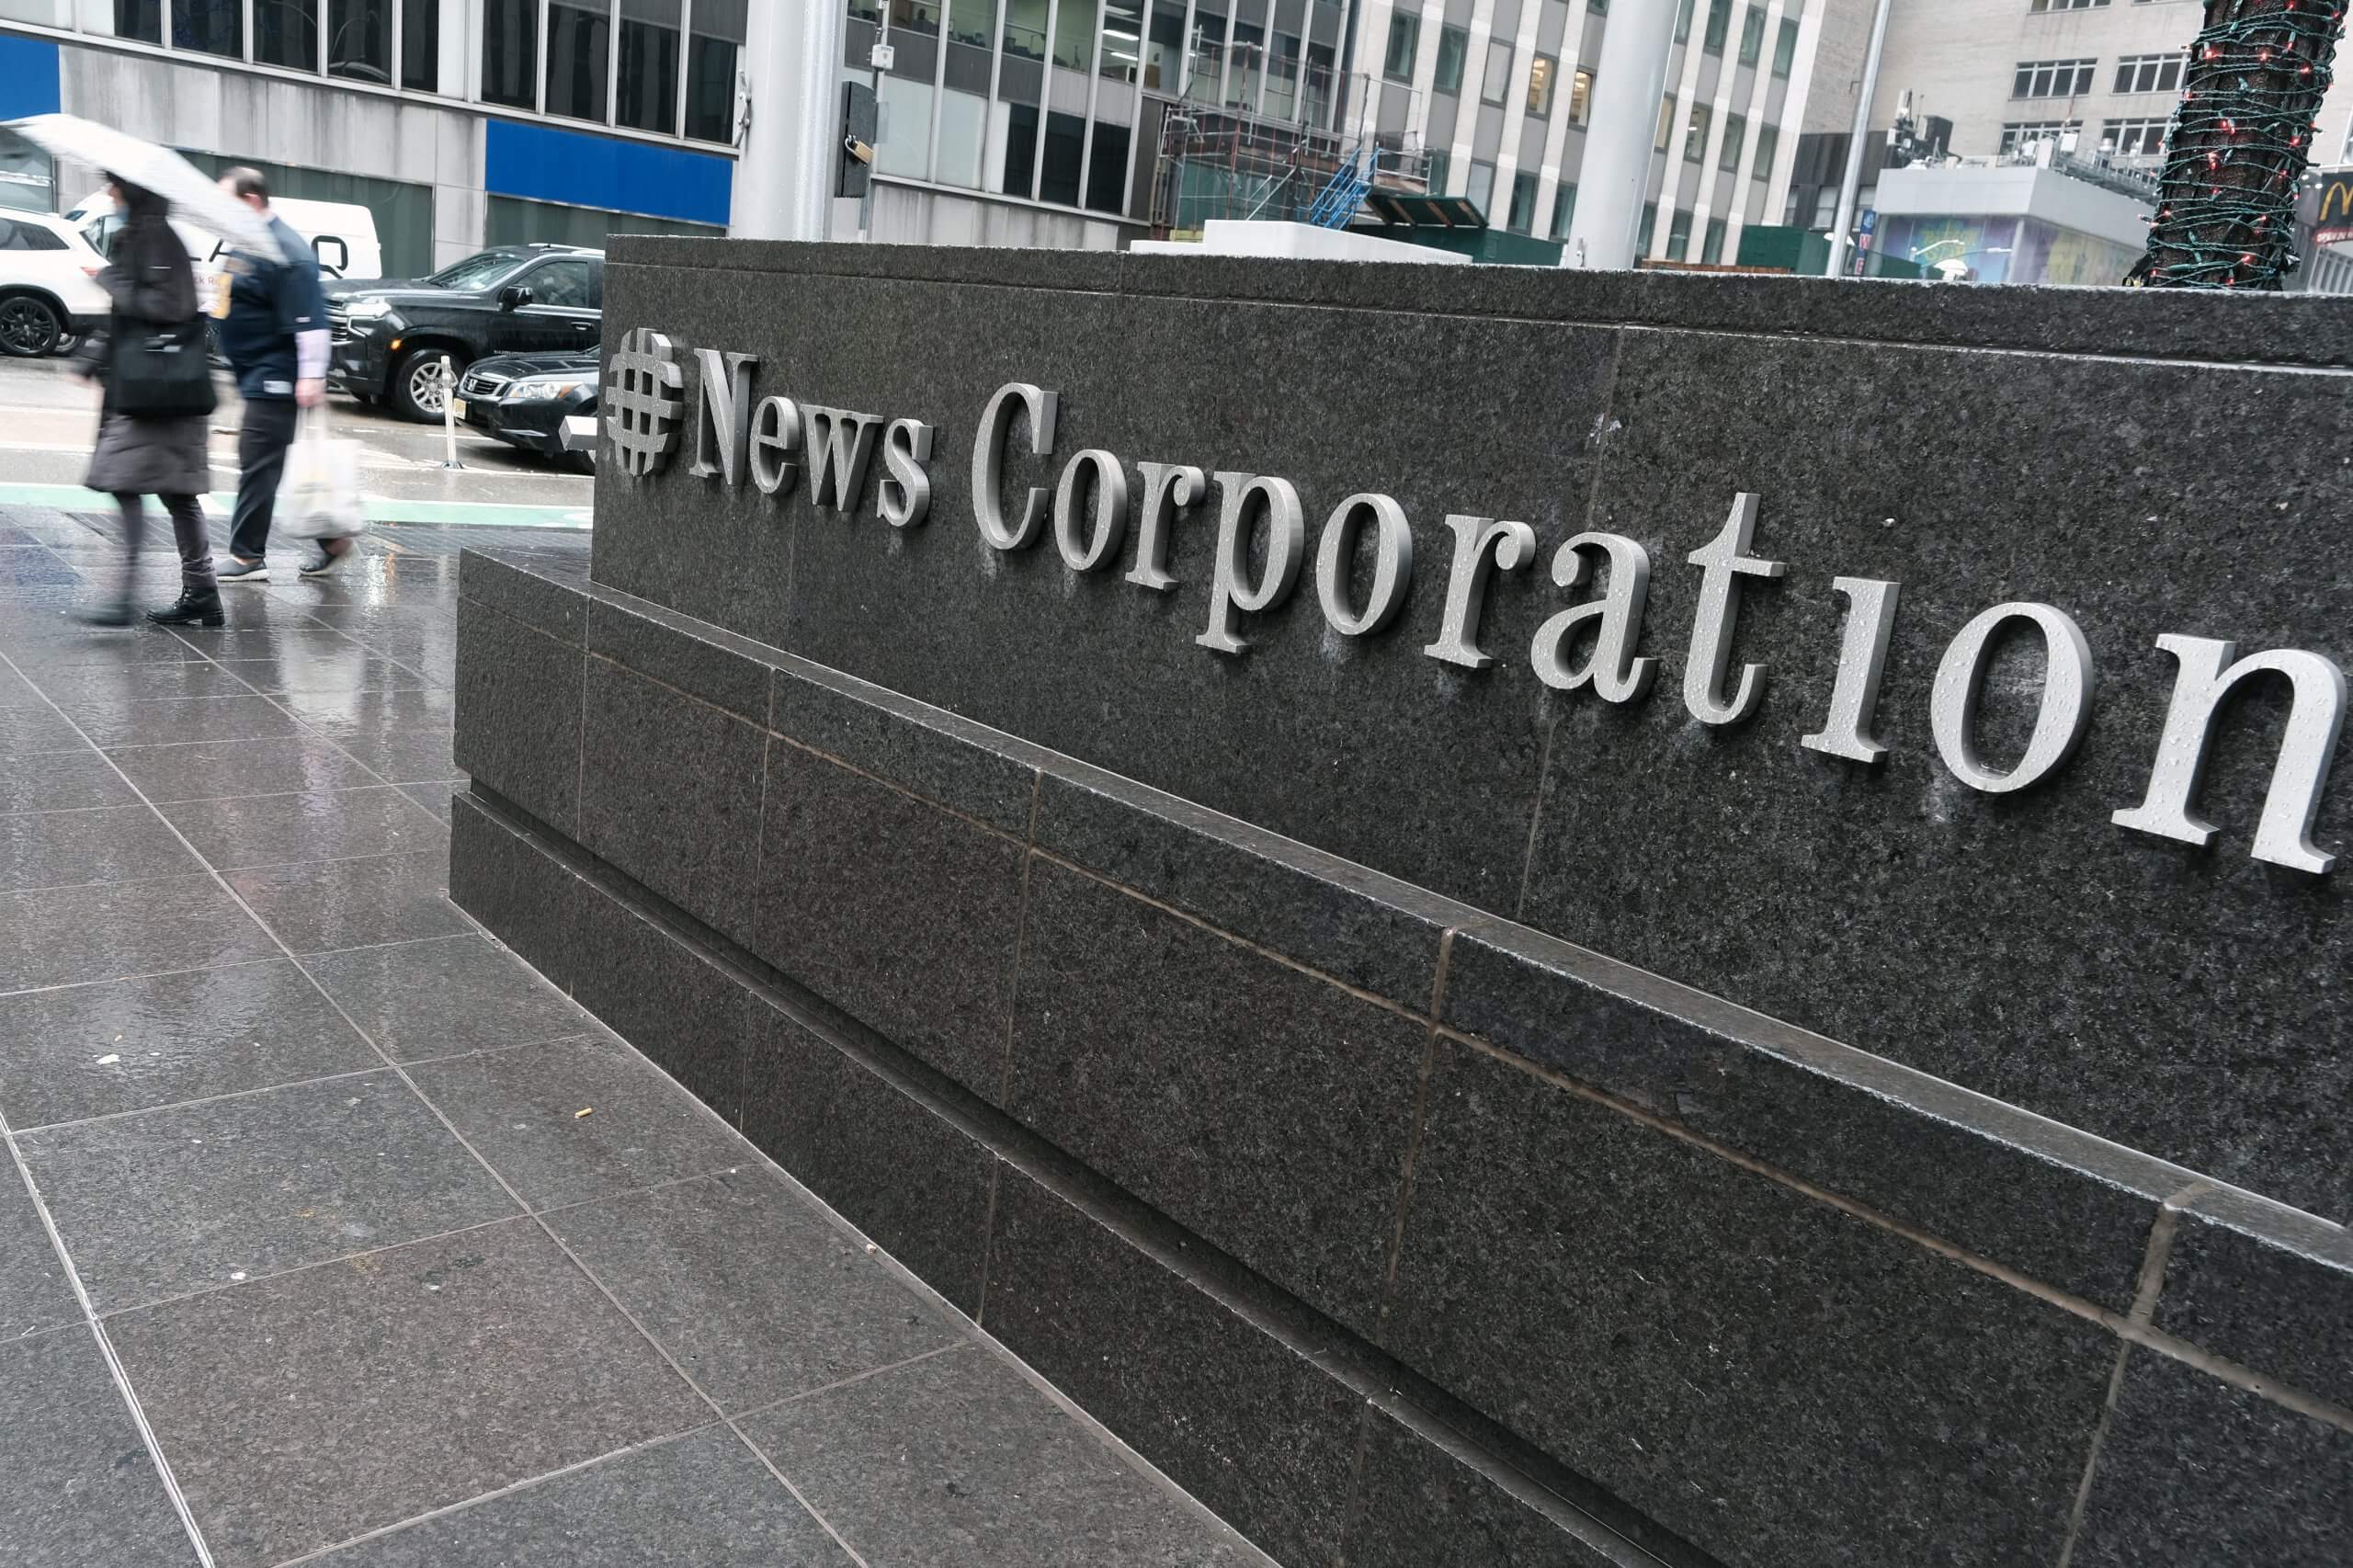 News Corp said in a filing that the "company's preliminary analysis indicates that foreign government involvement may be associated with this activity, and that data was taken."